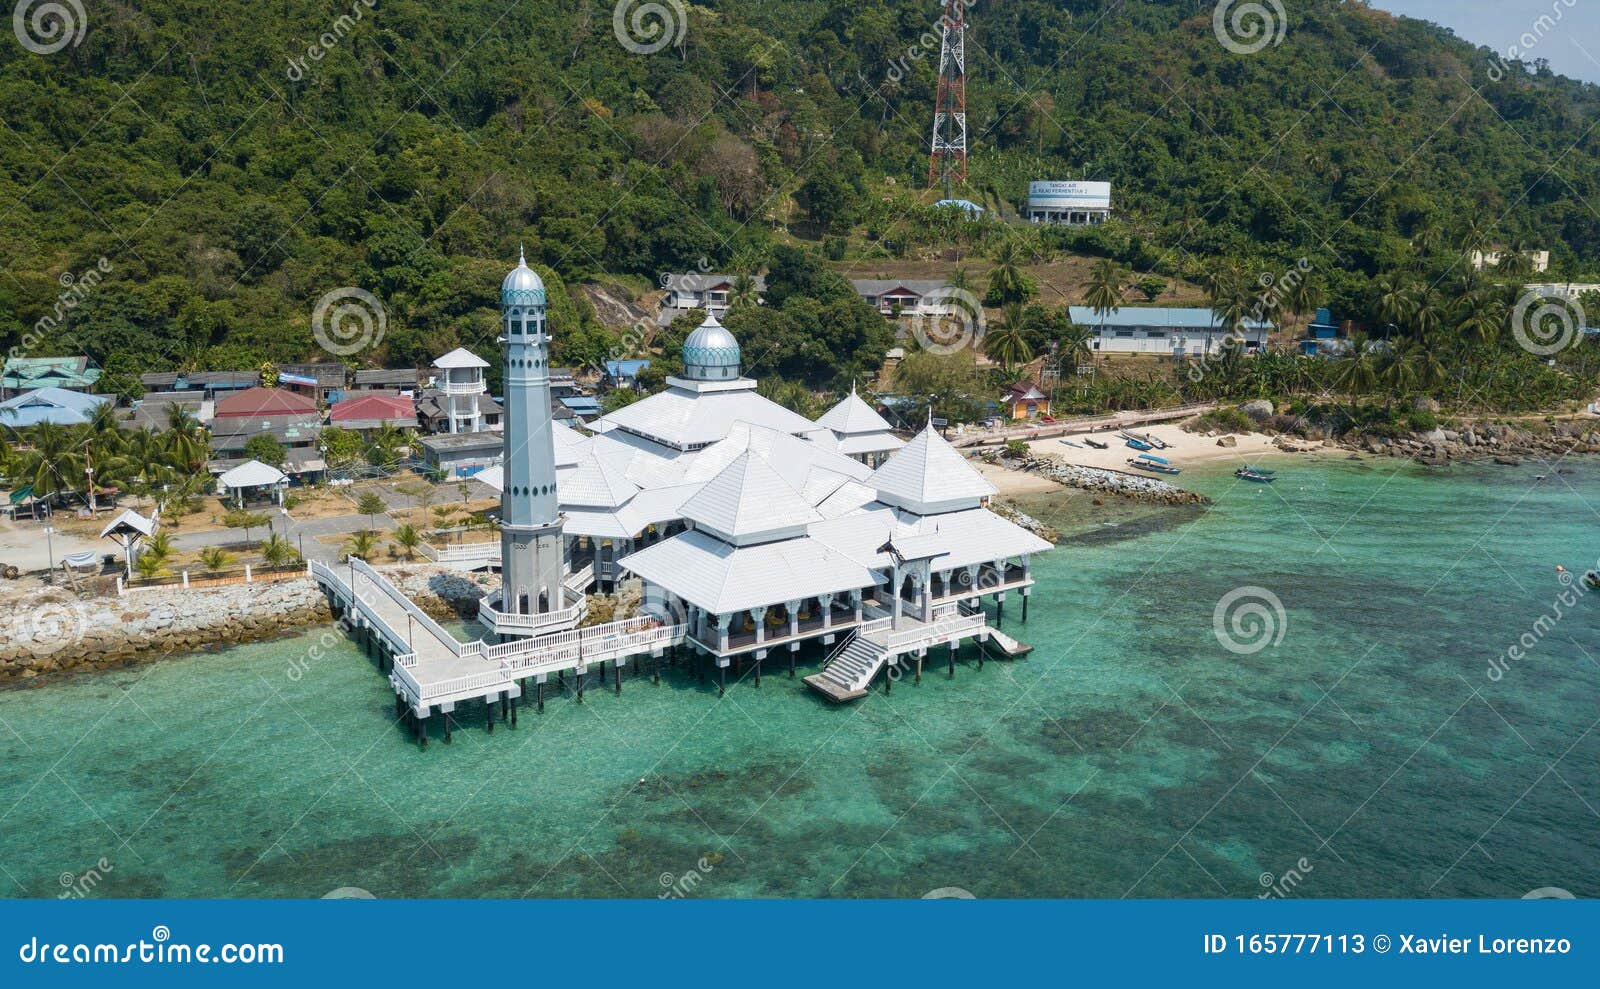 masjid besar mosque on the perhentian islands in malaysia